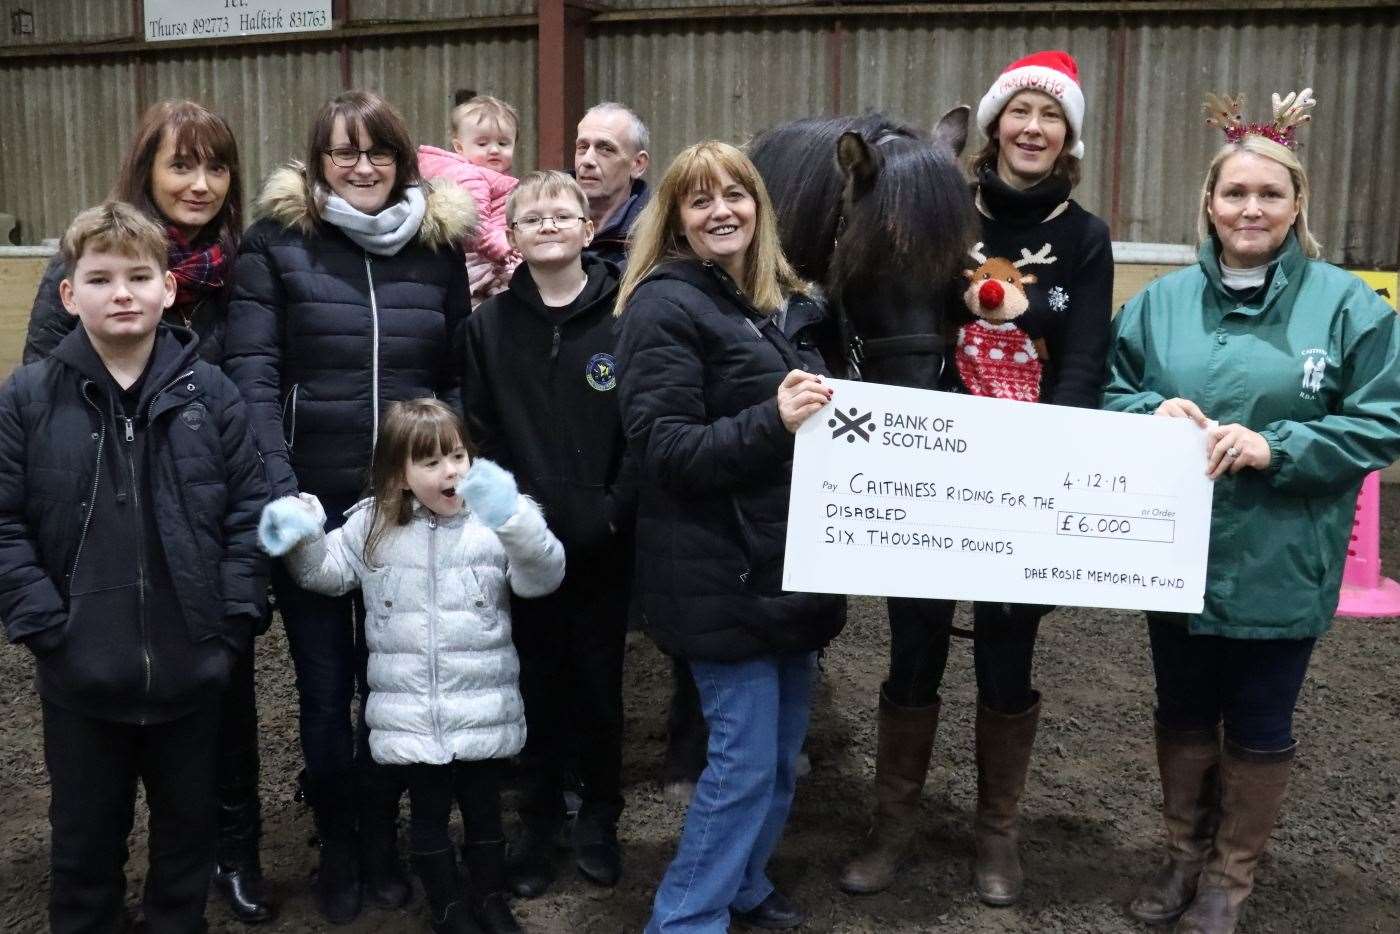 Members of the Rosie family handing over a cheque for £6000 to the Caithness RDA group chairperson Judith Miller (right), with volunteer Liz Hewitson looking on. Picture: Neil Buchan